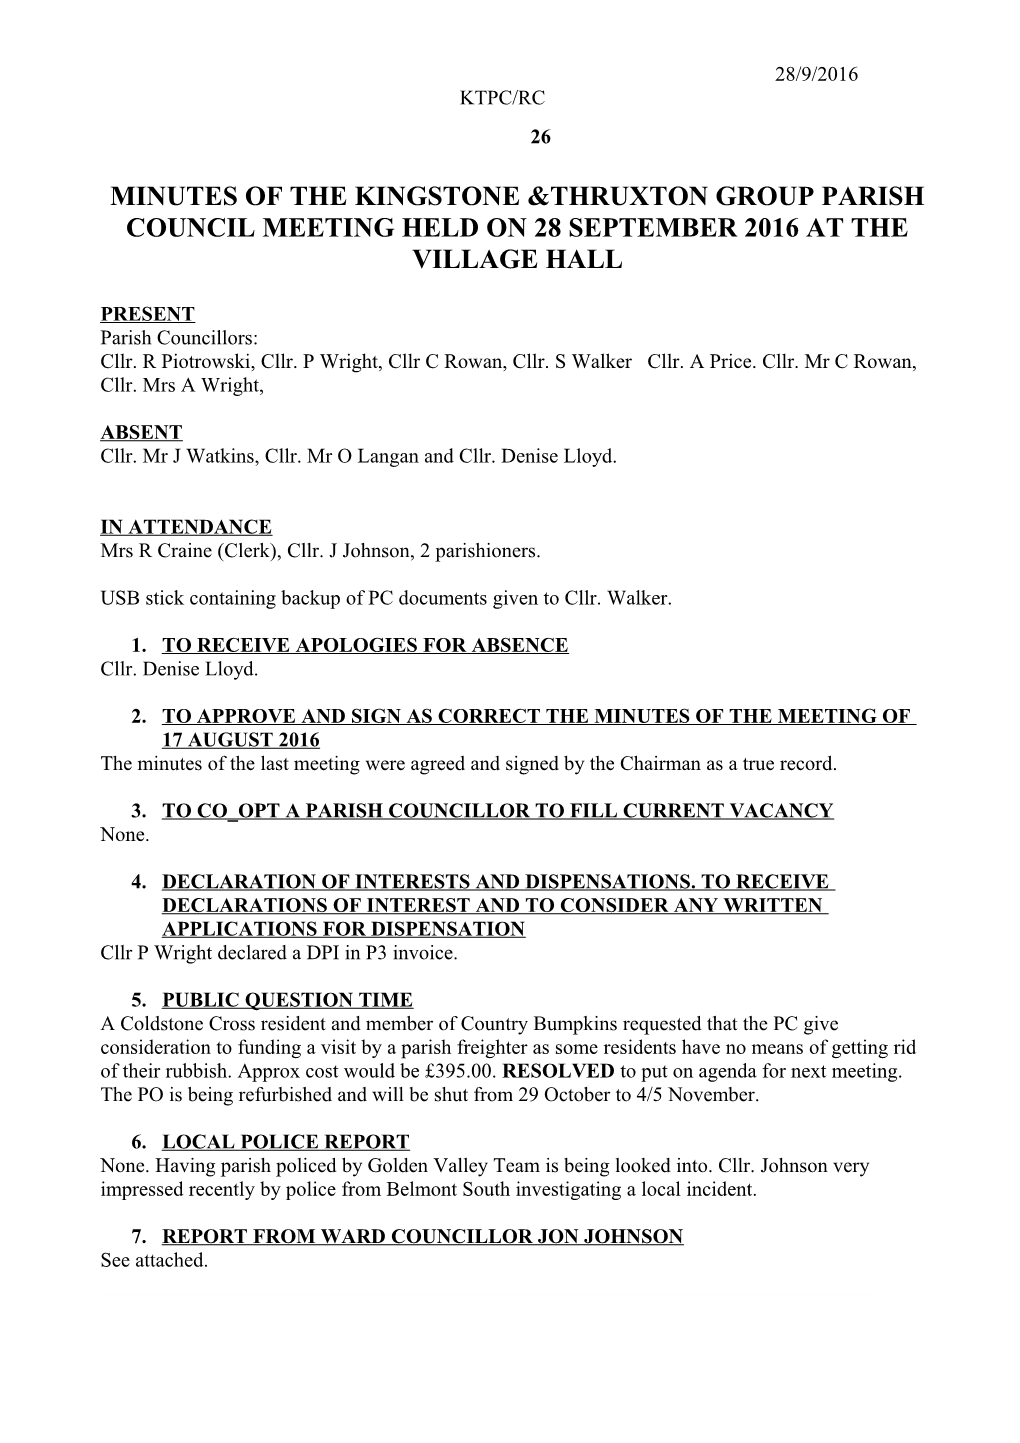 Minutes of the Kingstone &Thruxton Group Parish Council Meeting Held on 21 August 2013 s1